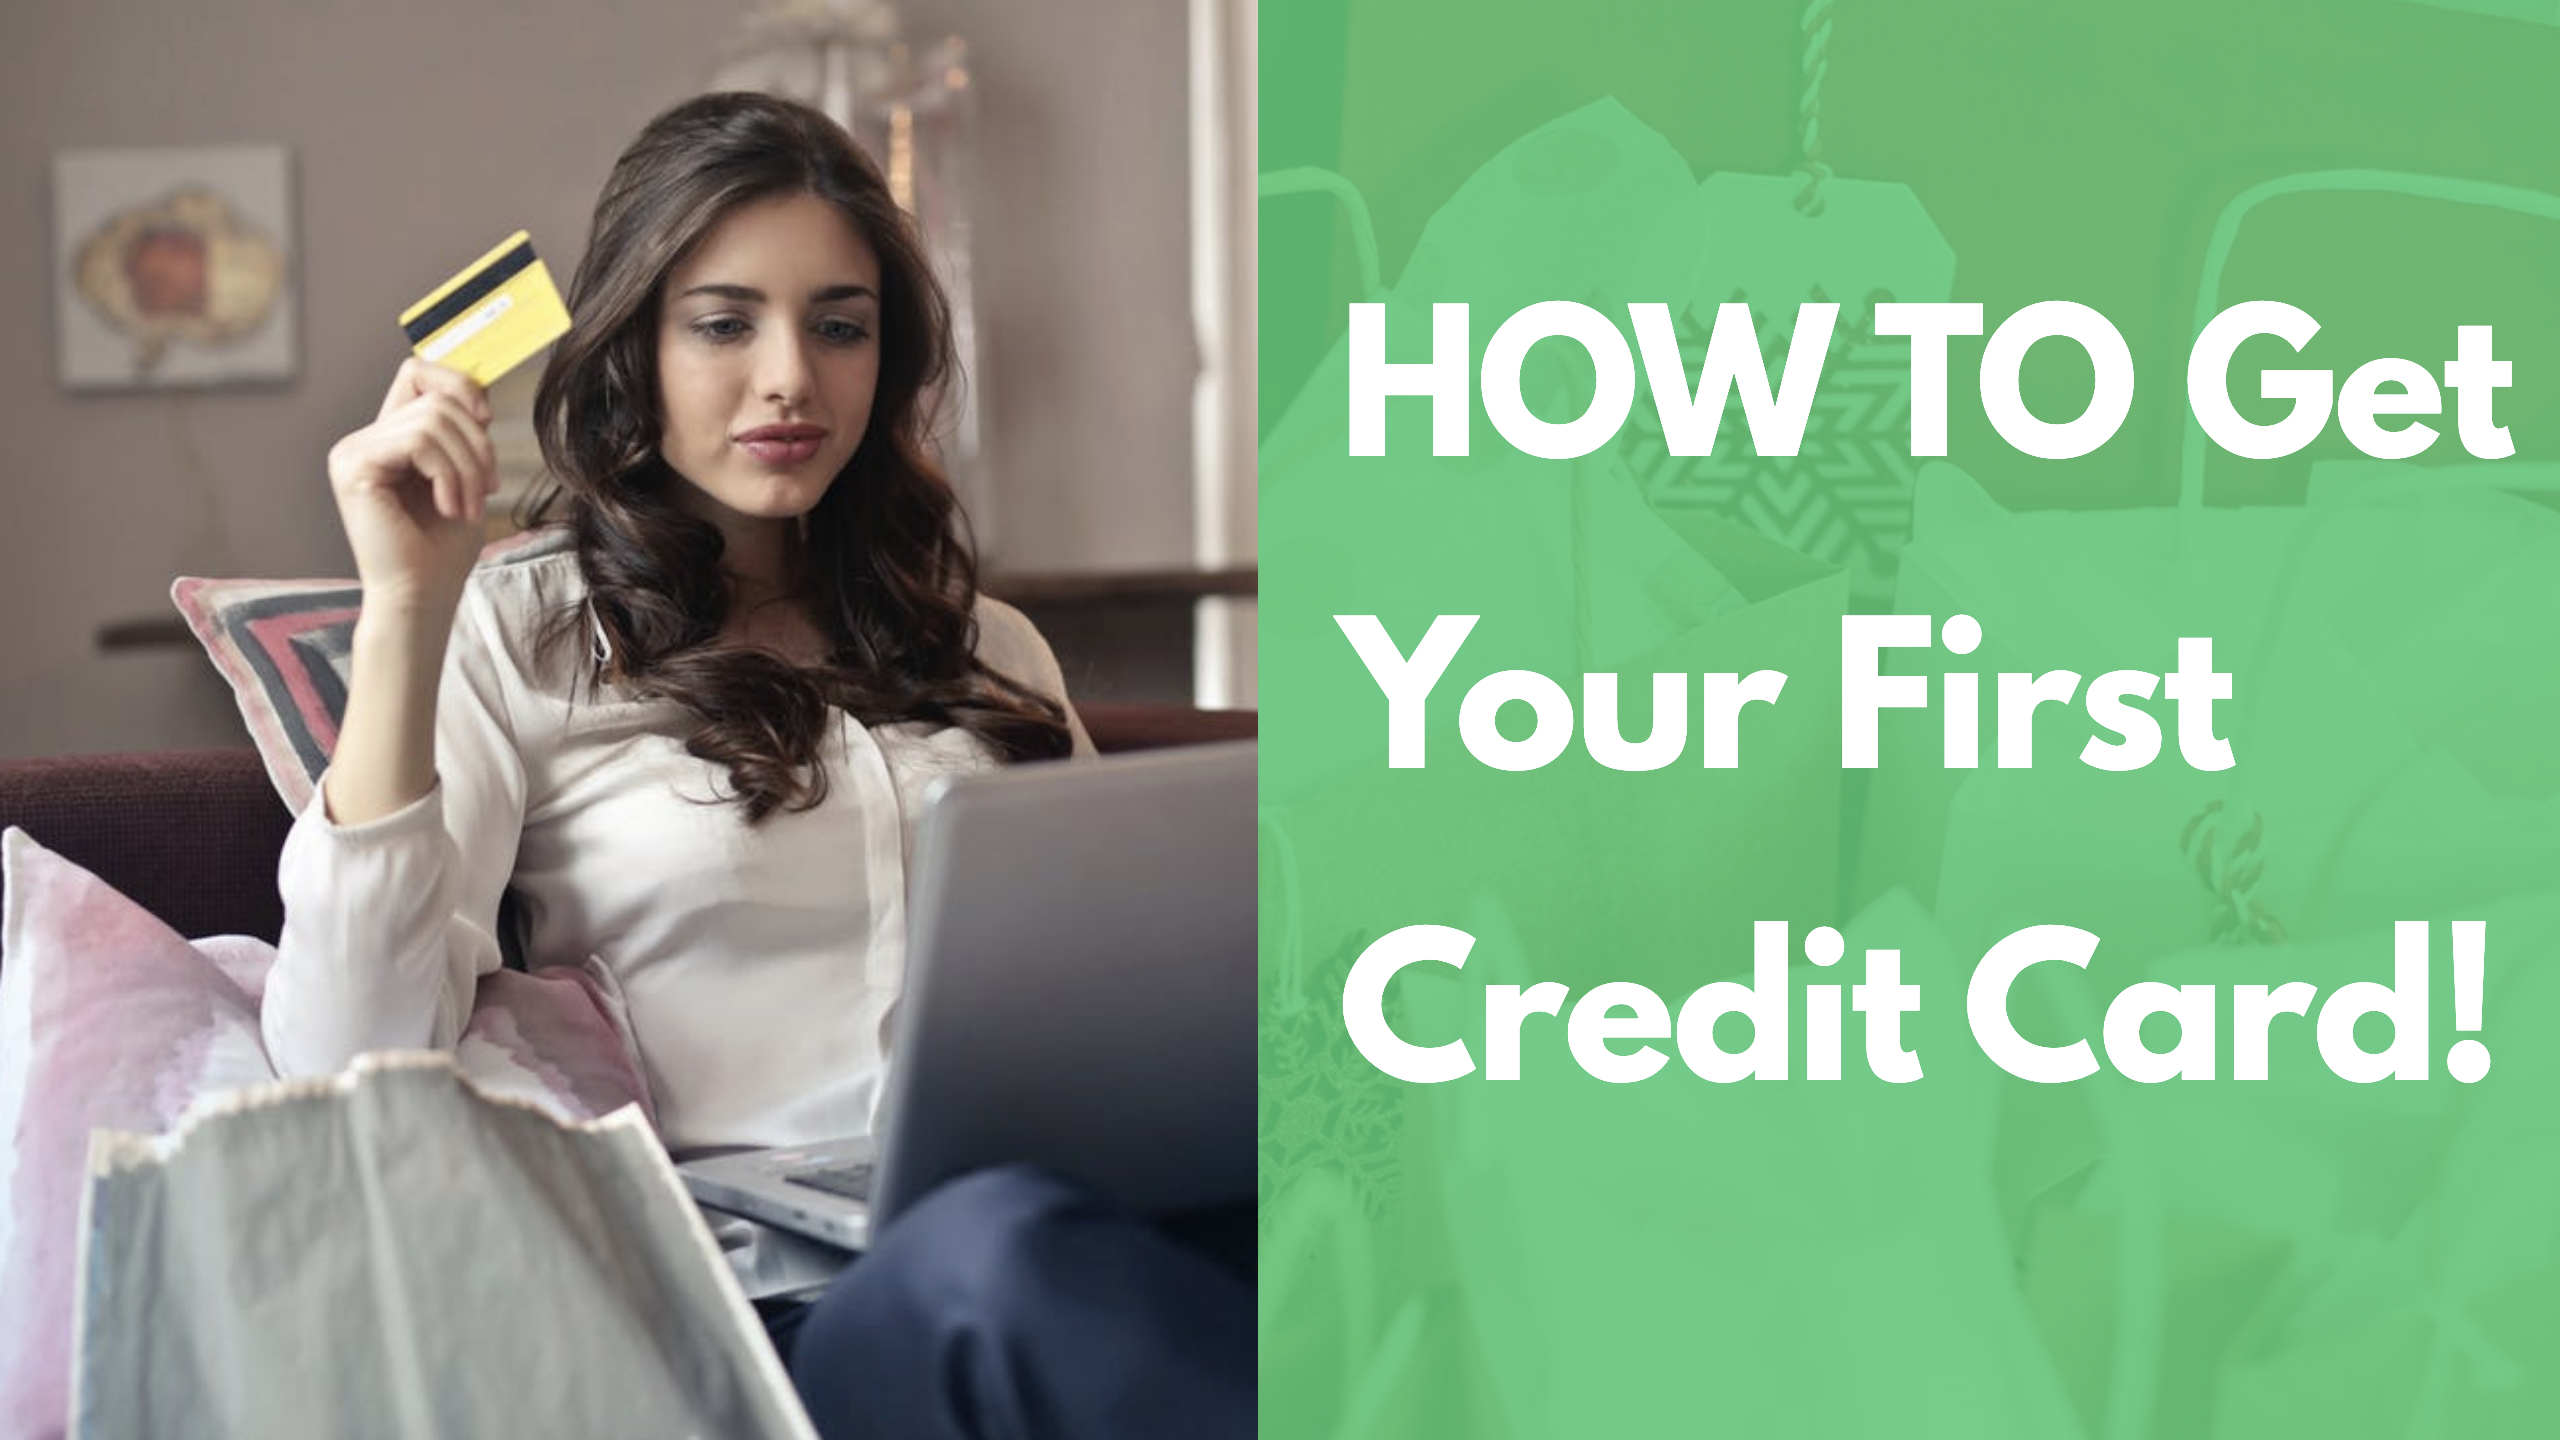 Getting Your First Credit Card - The FIRE Starter Pack